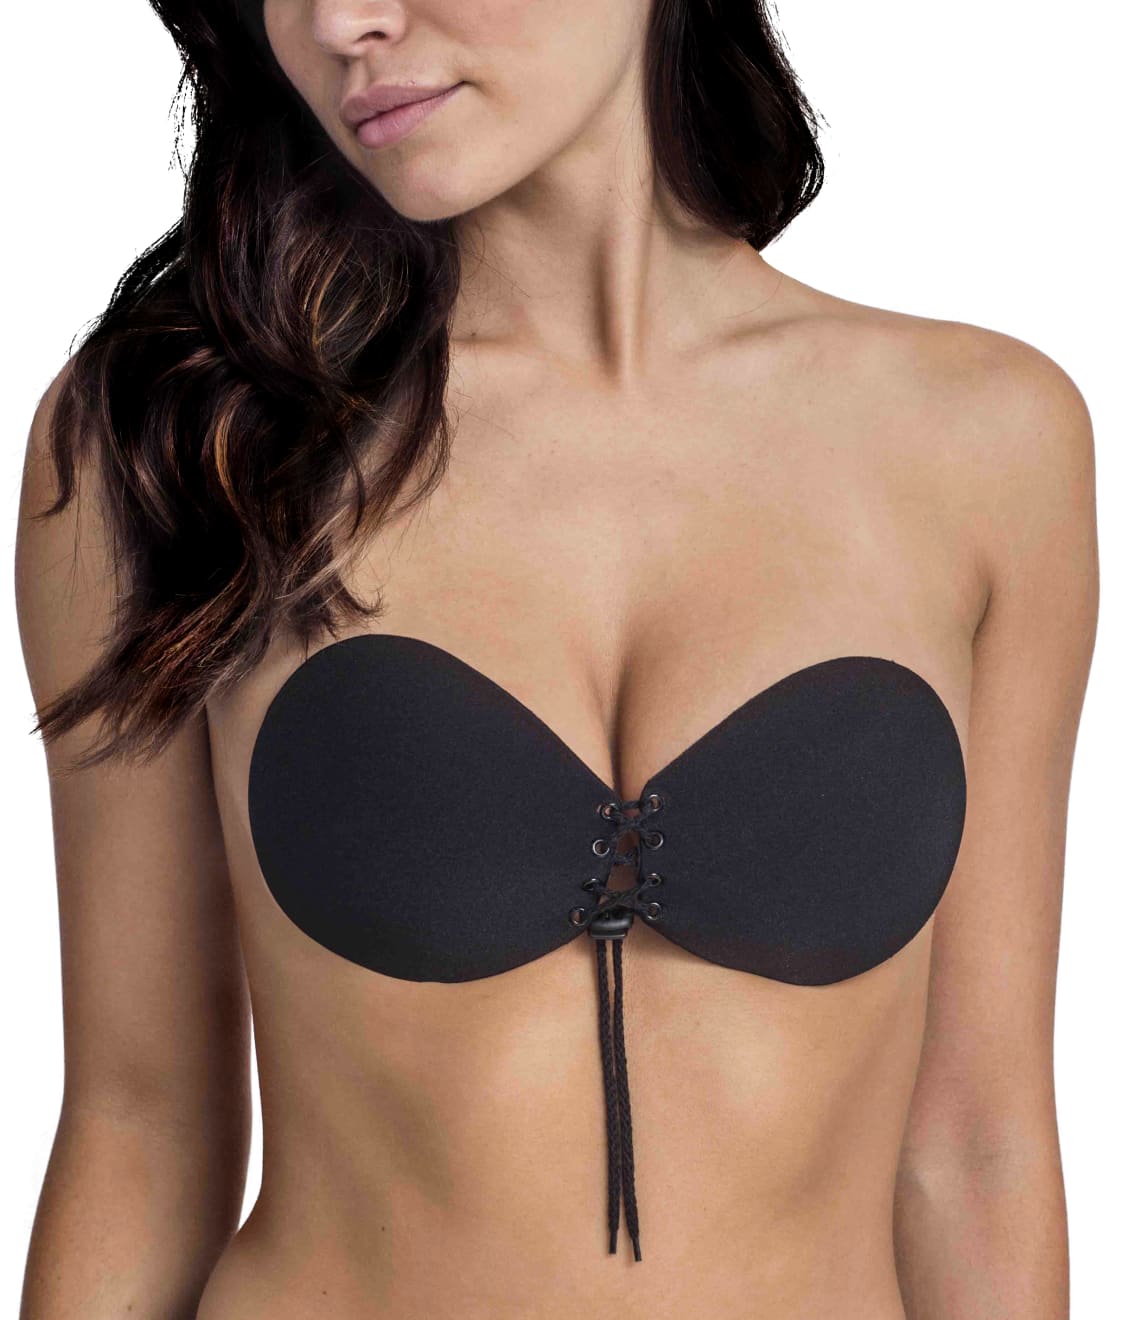 Adhesive Bras Australia: An Innovative Solution to Strapless and